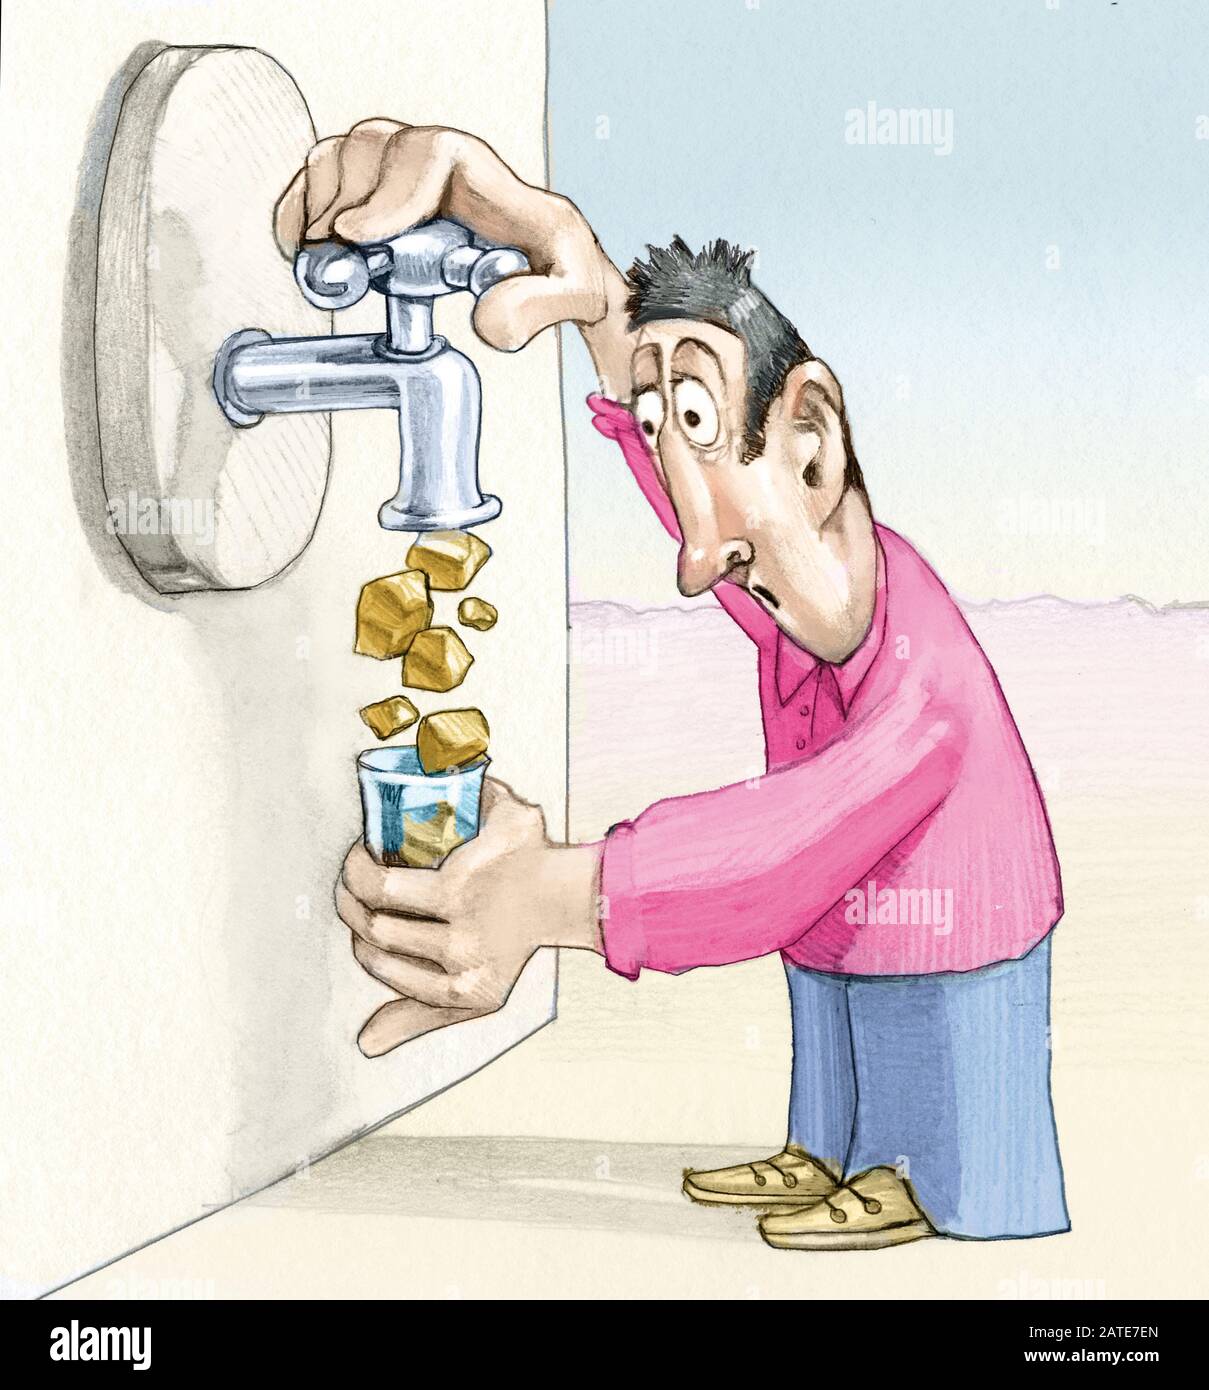 man opens tap but no water comes out stones come out He has a worried and astonished expression humorous political illustration Stock Photo